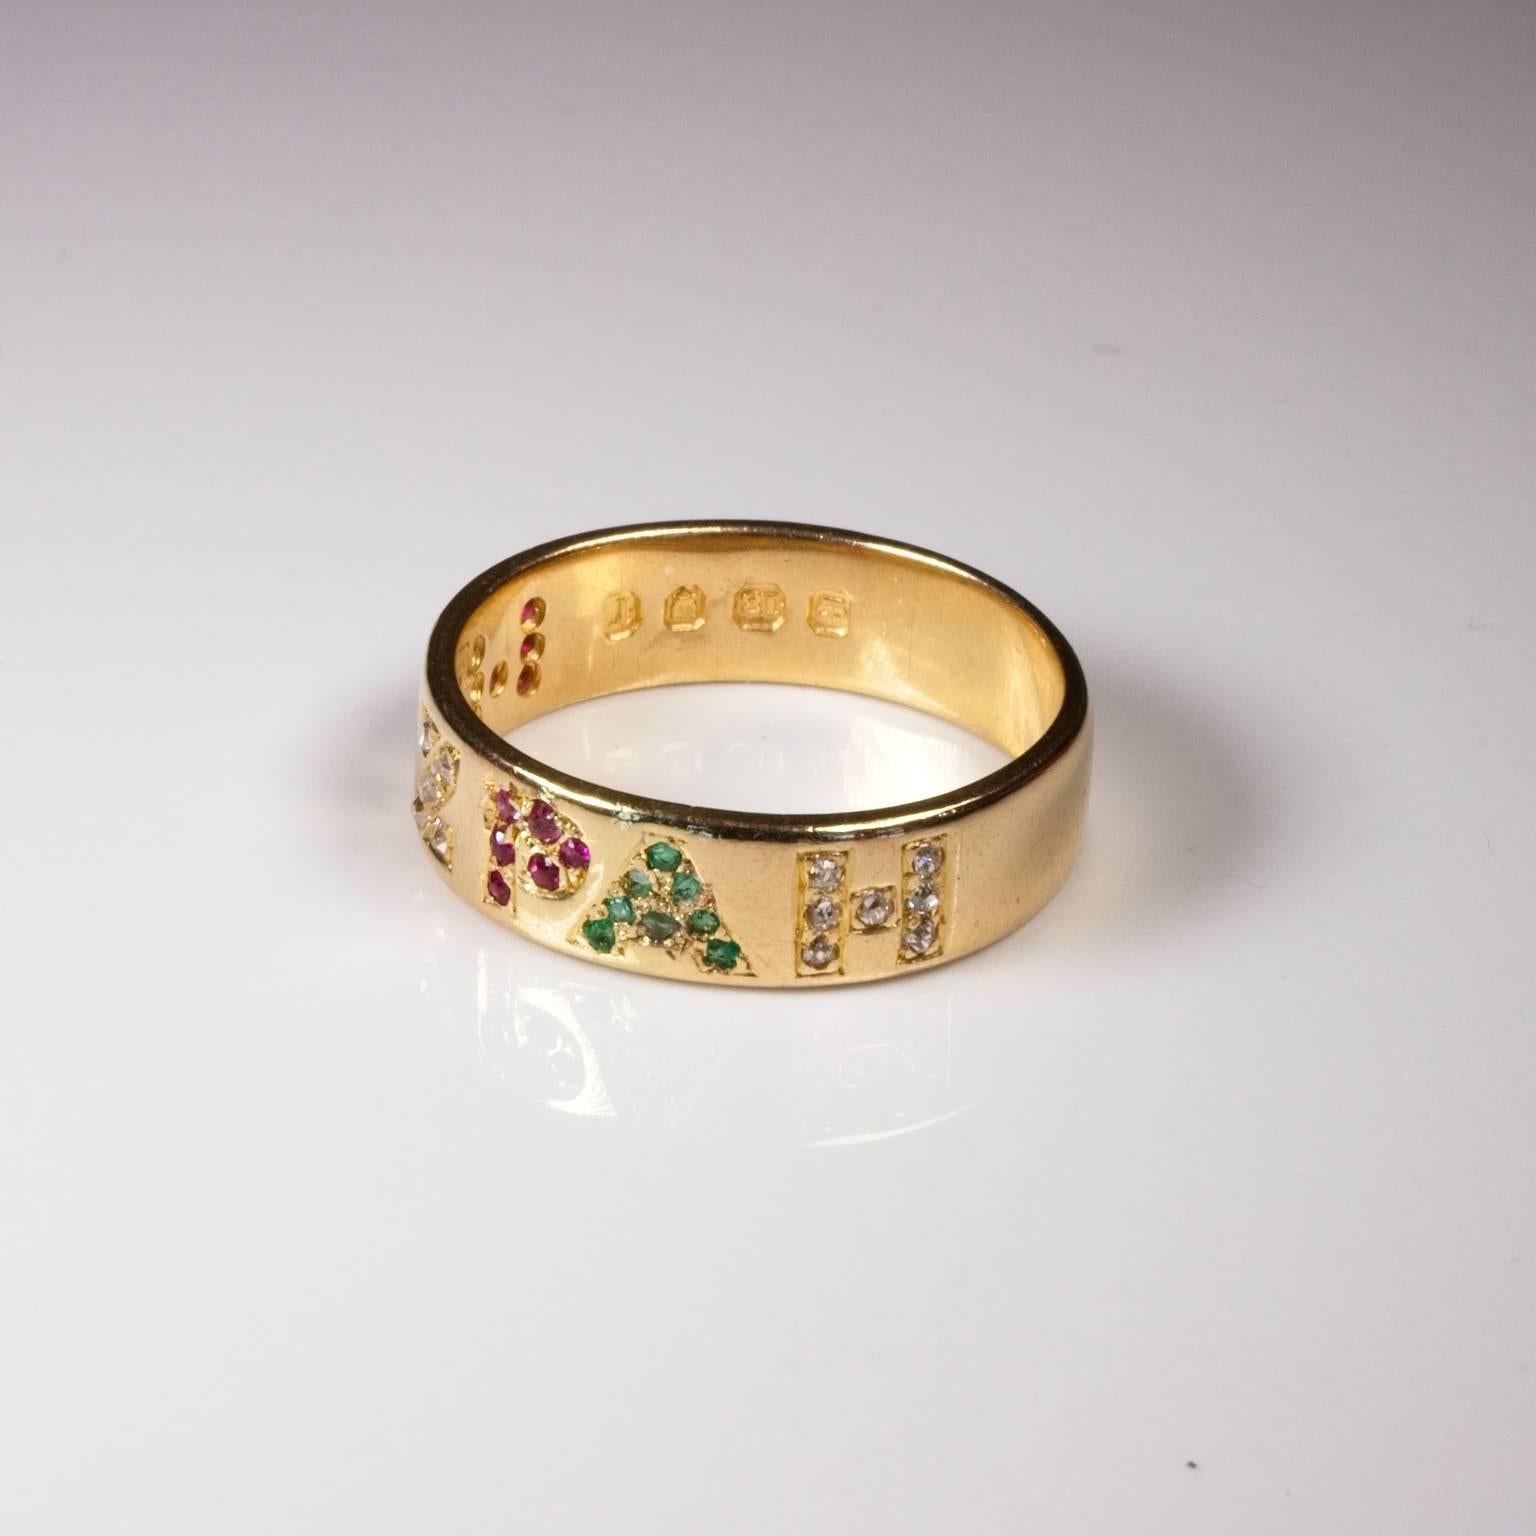 Fabulous and rare, this Mizpah 18ct gold ring is hallmarked for London 1872 and set with rubies, emeralds and diamonds. This sentiment, roughly translated as: May the Lord protect thee and me when we are separated one from the other, was often